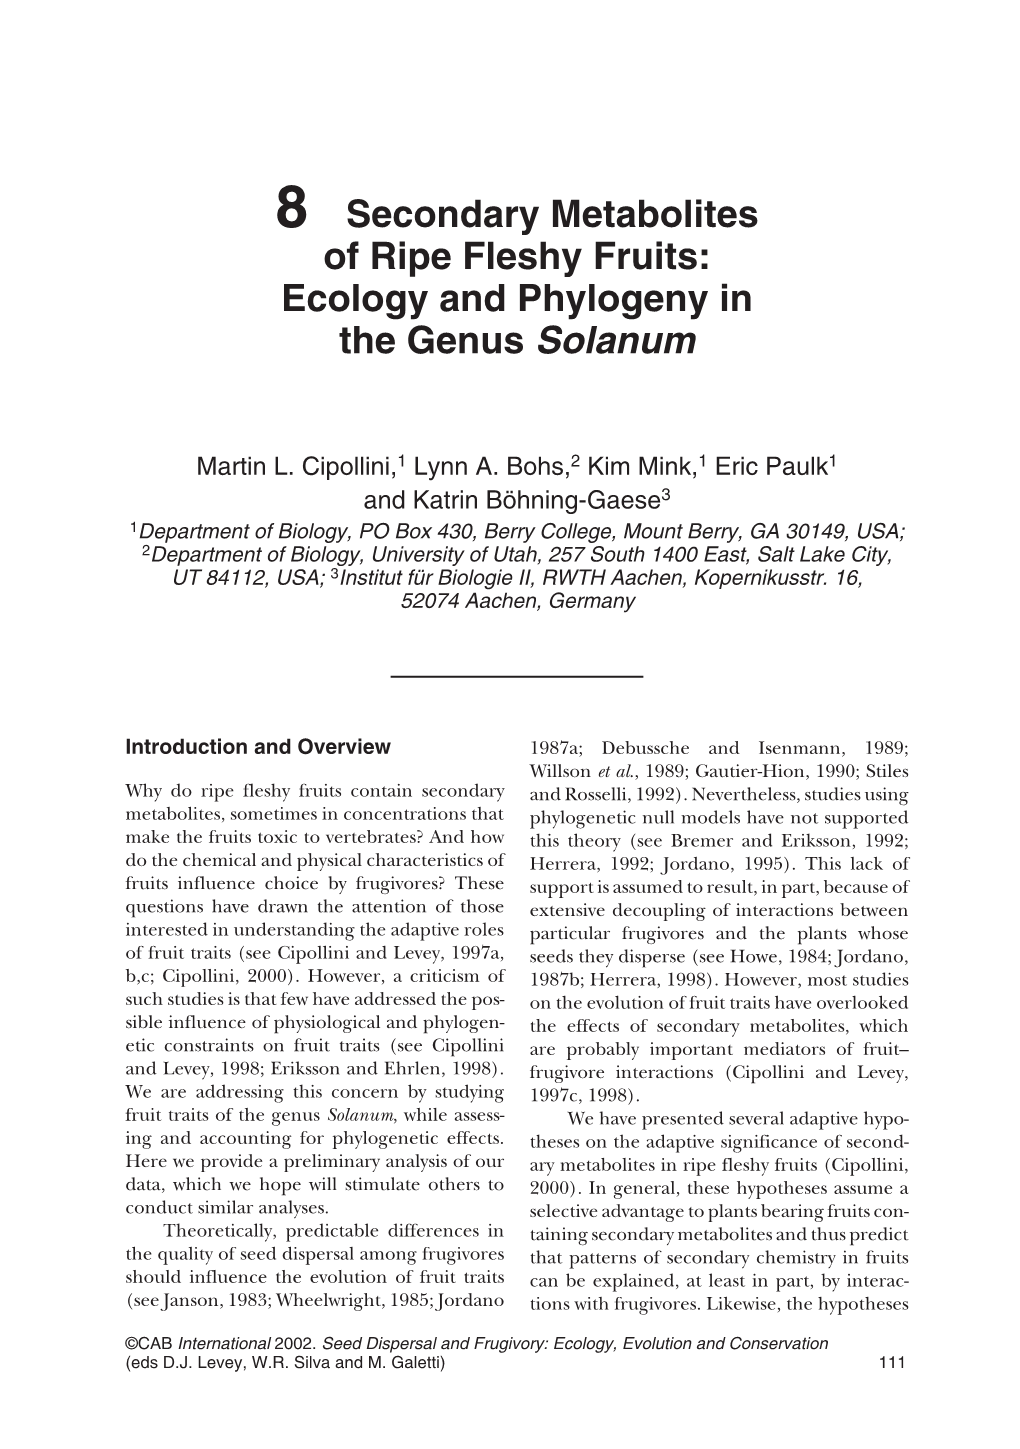 Of Ripe Fleshy Fruits: Ecology and Phylogeny in the Genus Solanum